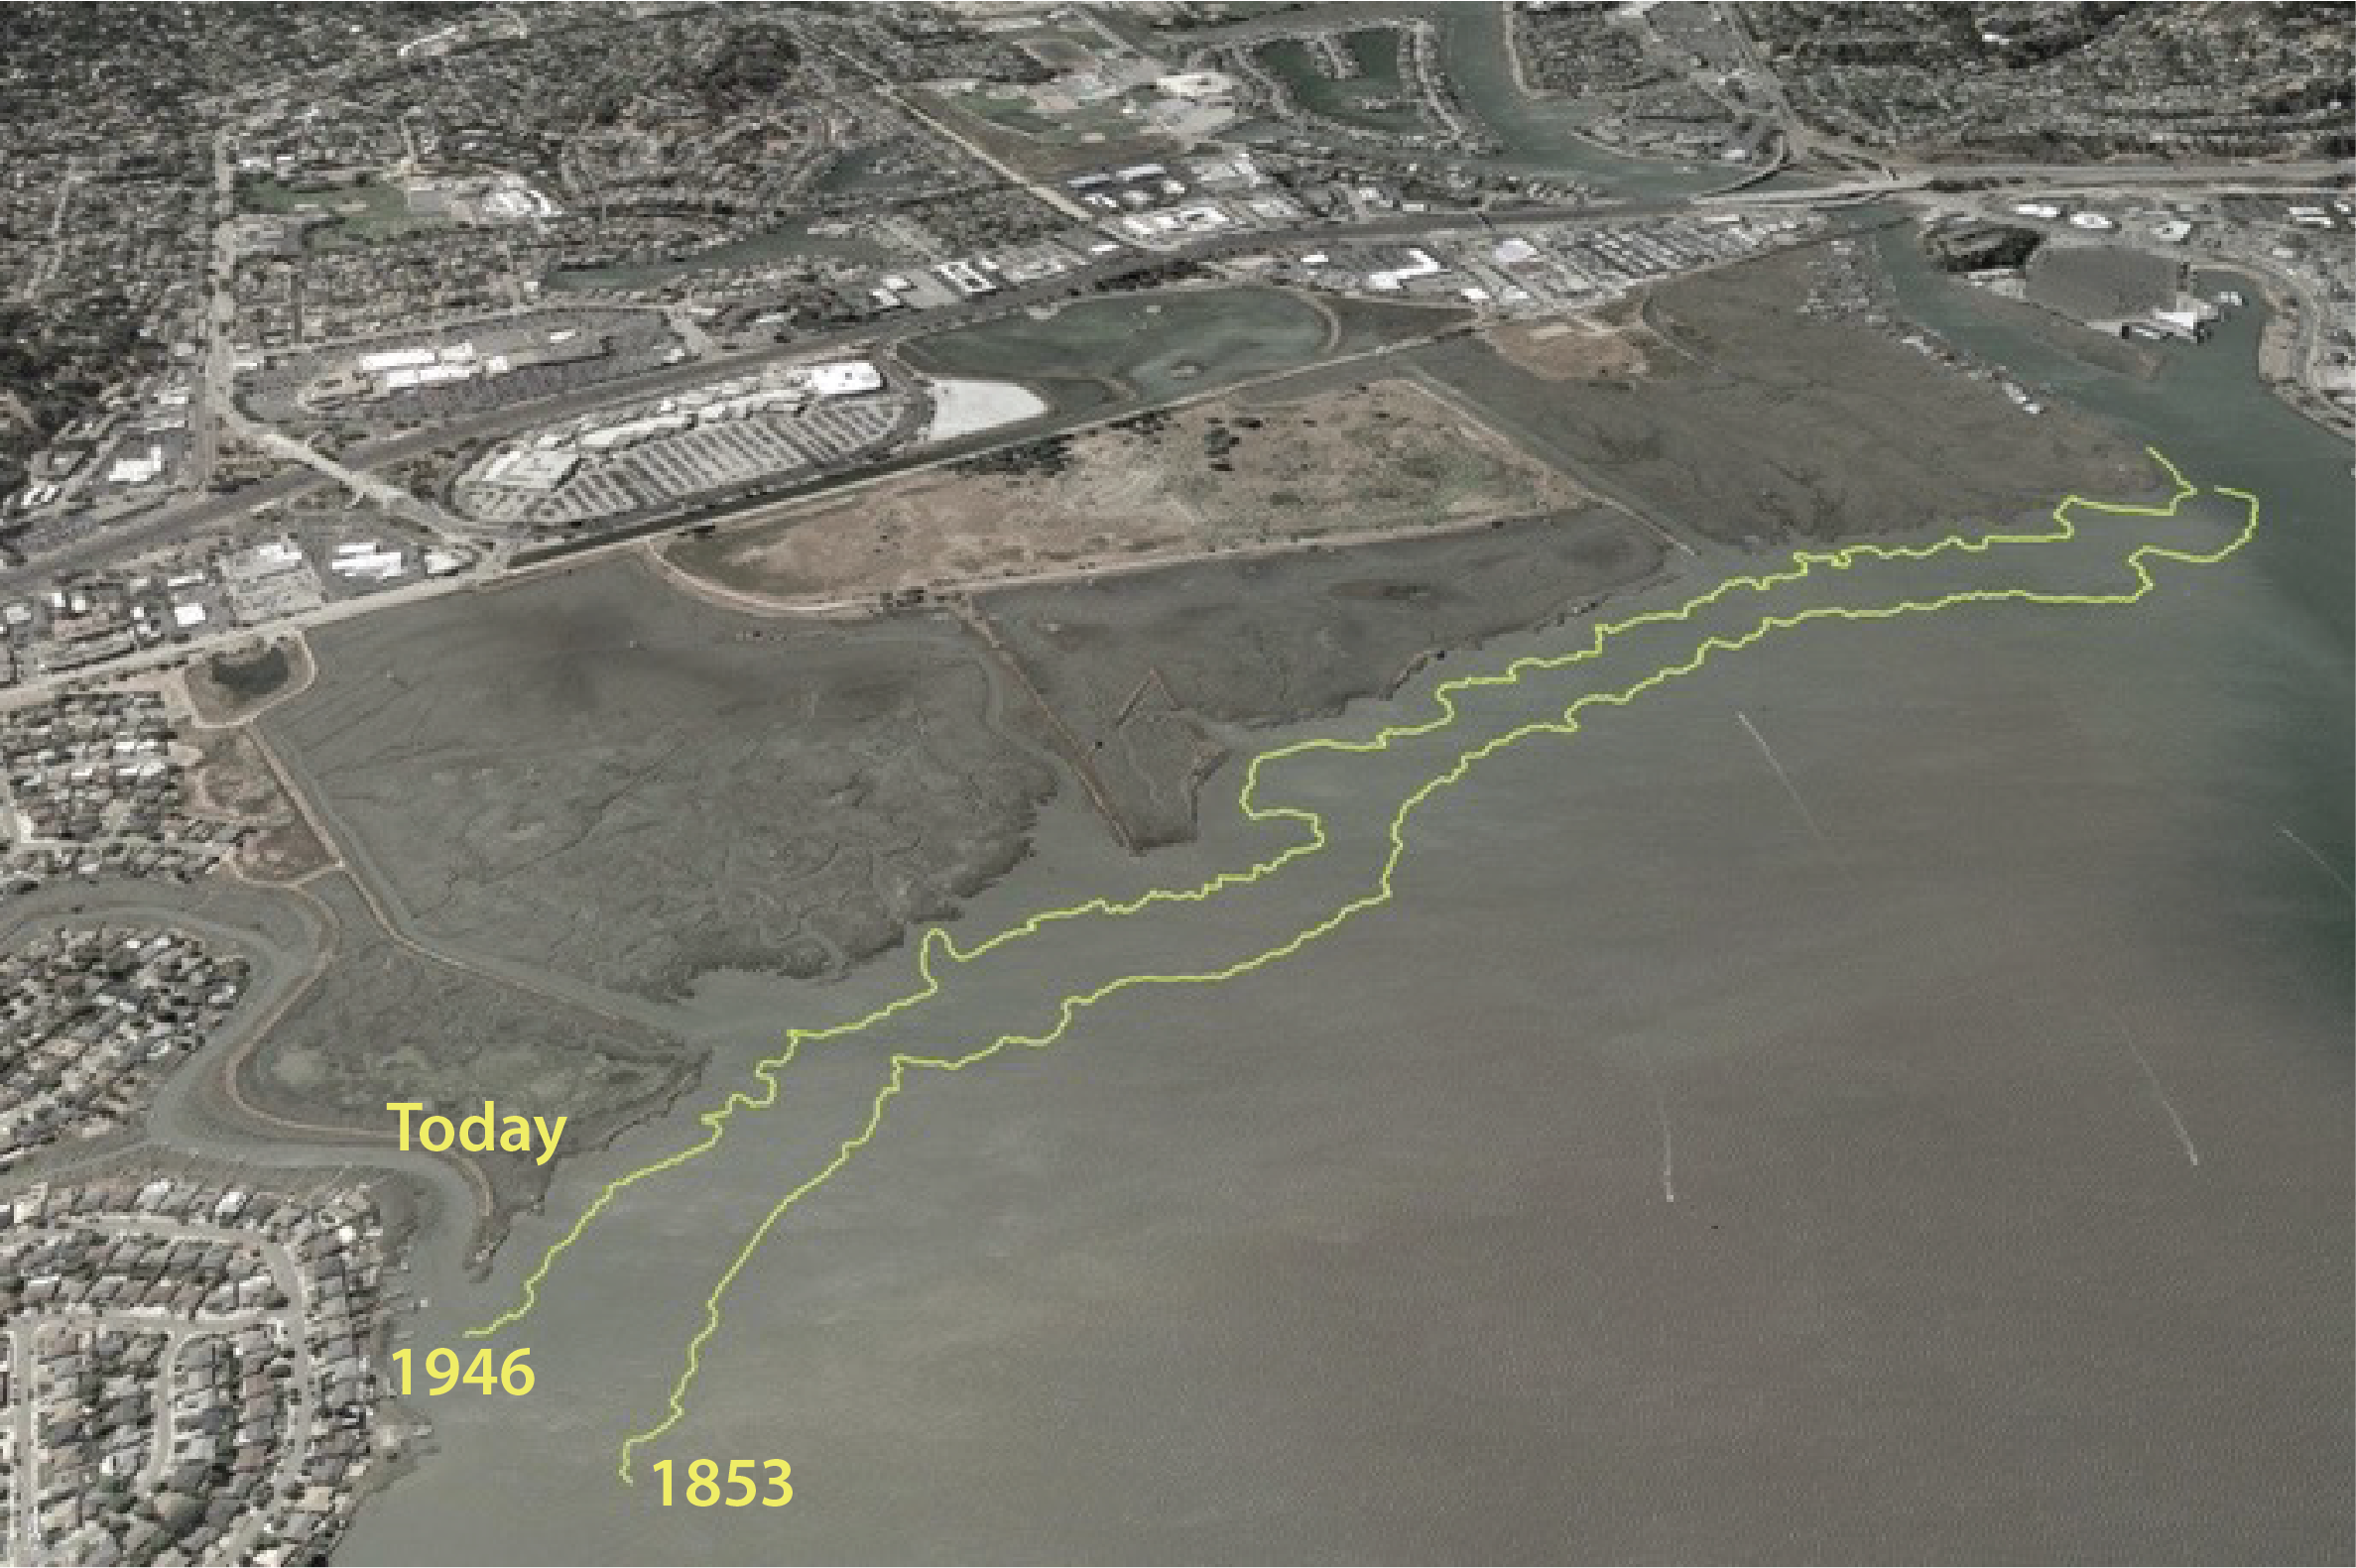 shoreline change 1853, 1946 and today